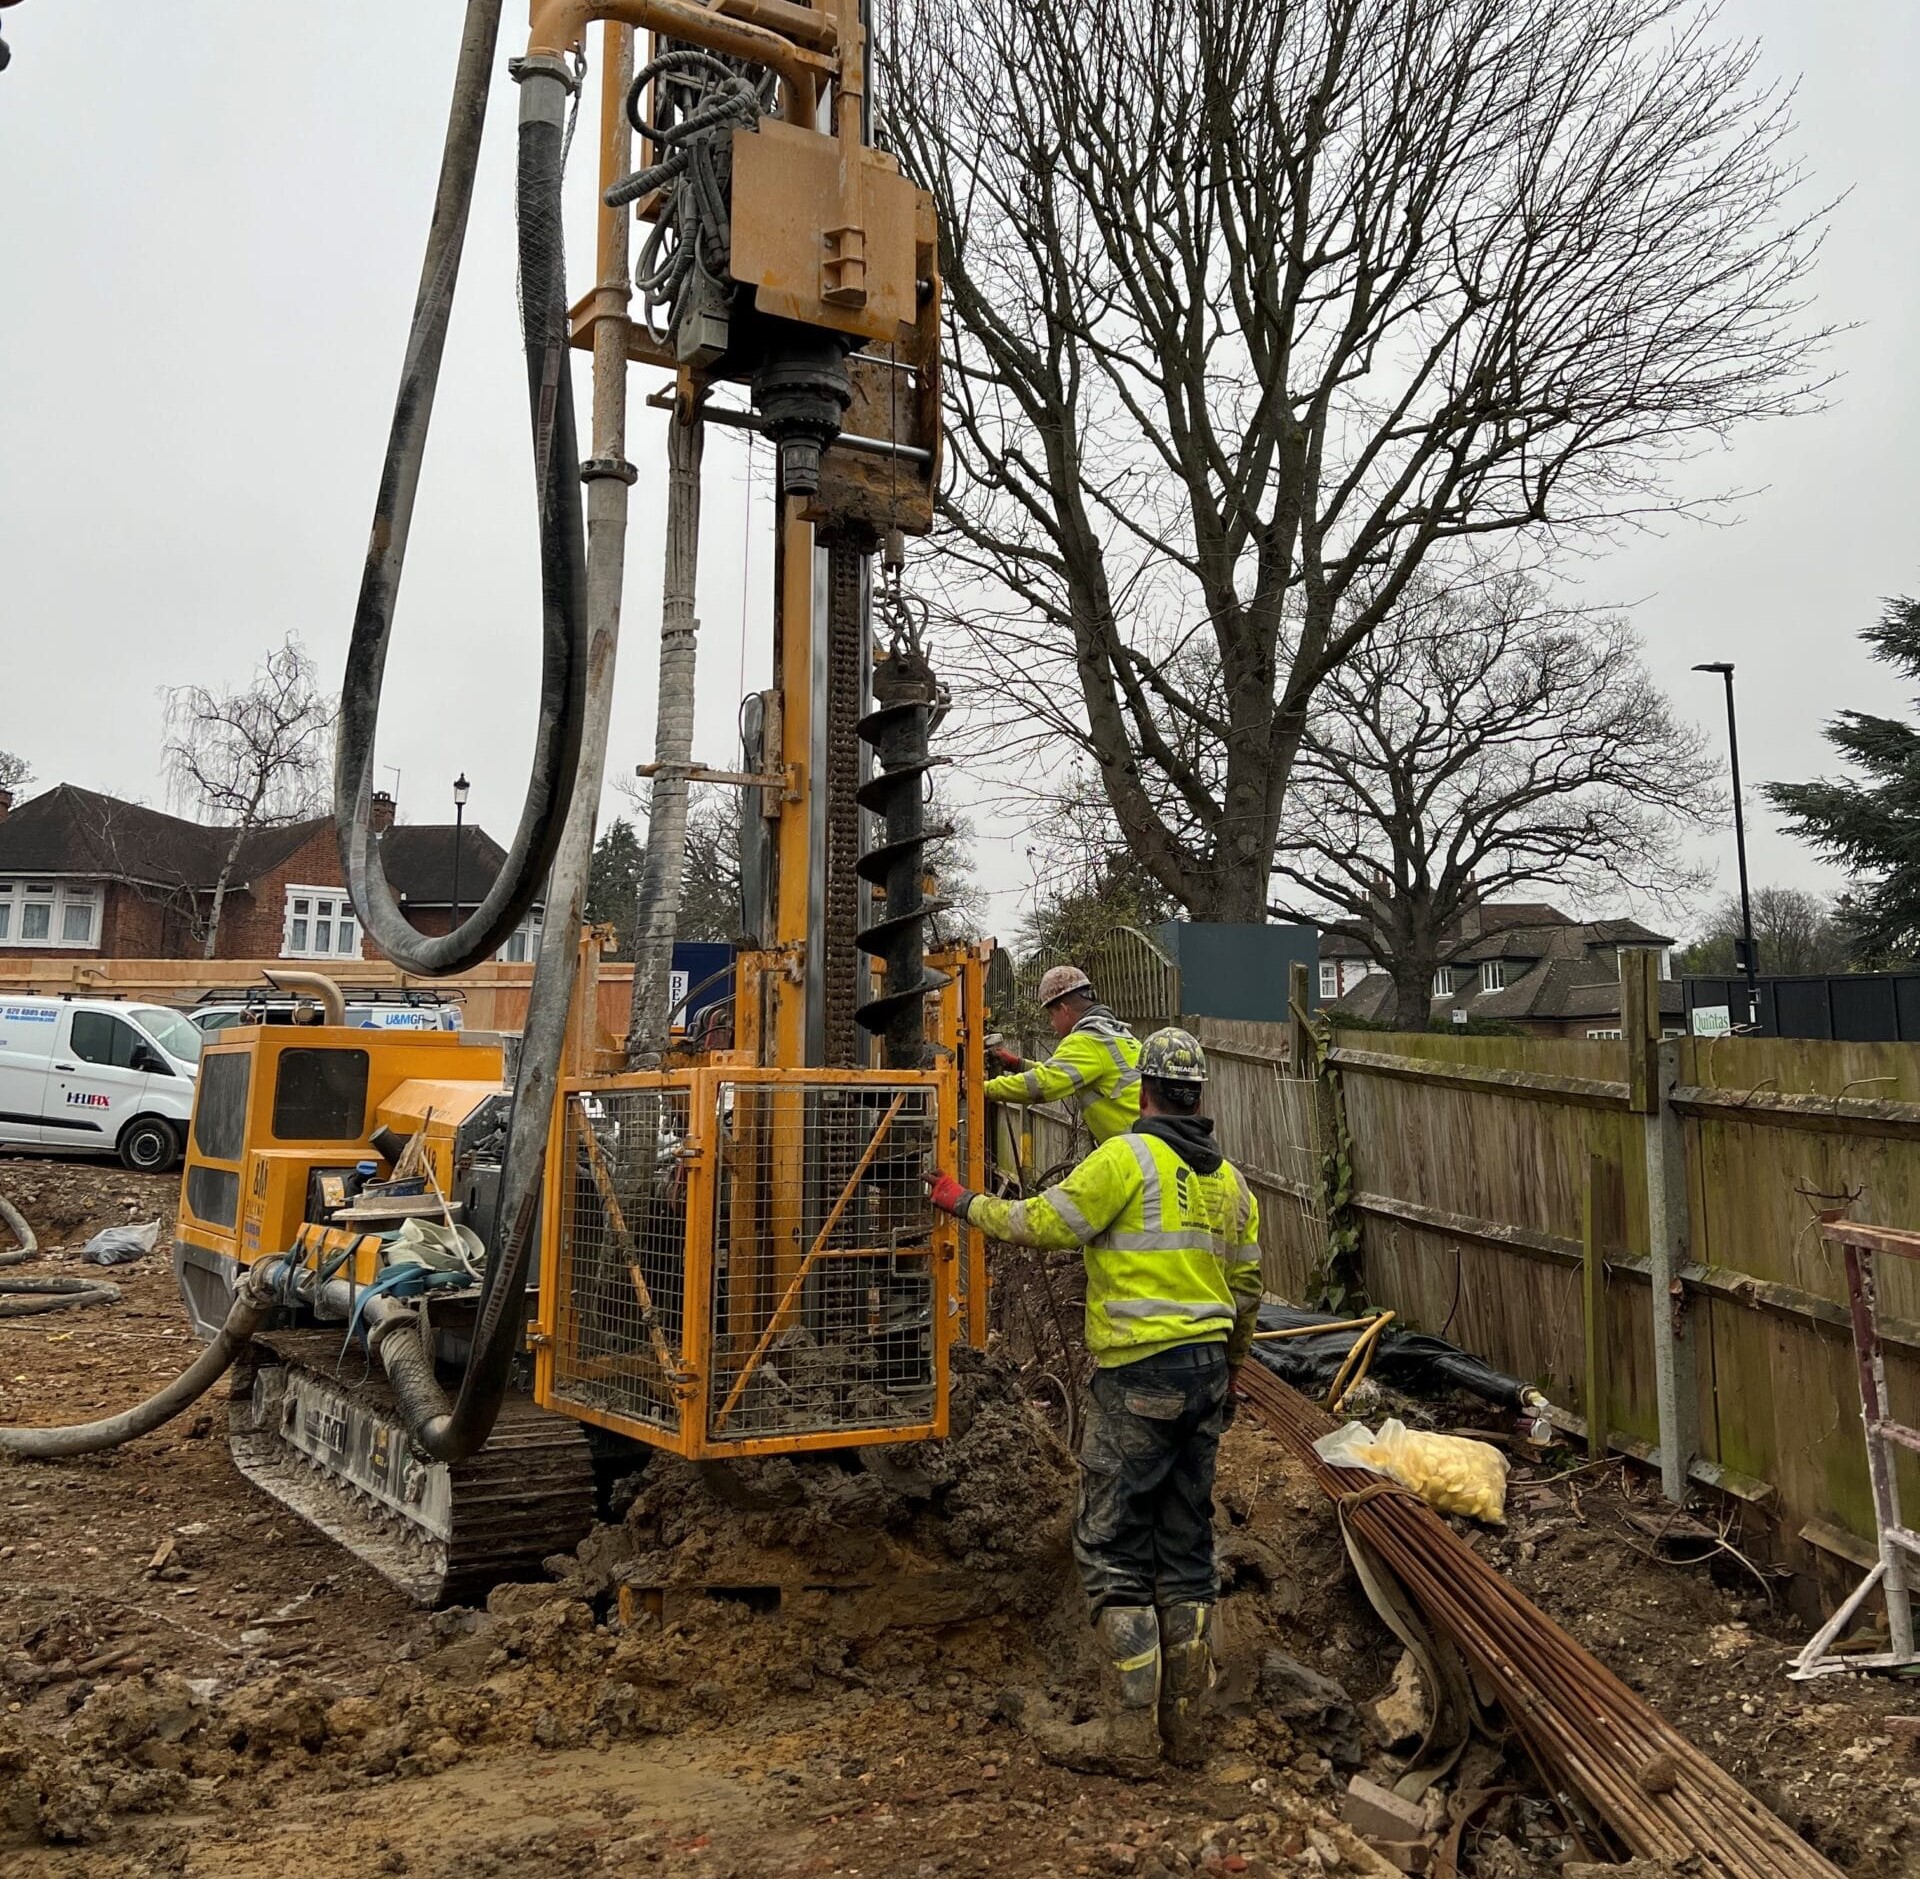 U&M Group offers piling services, here two workers are using piling machinery on a fenced yard.